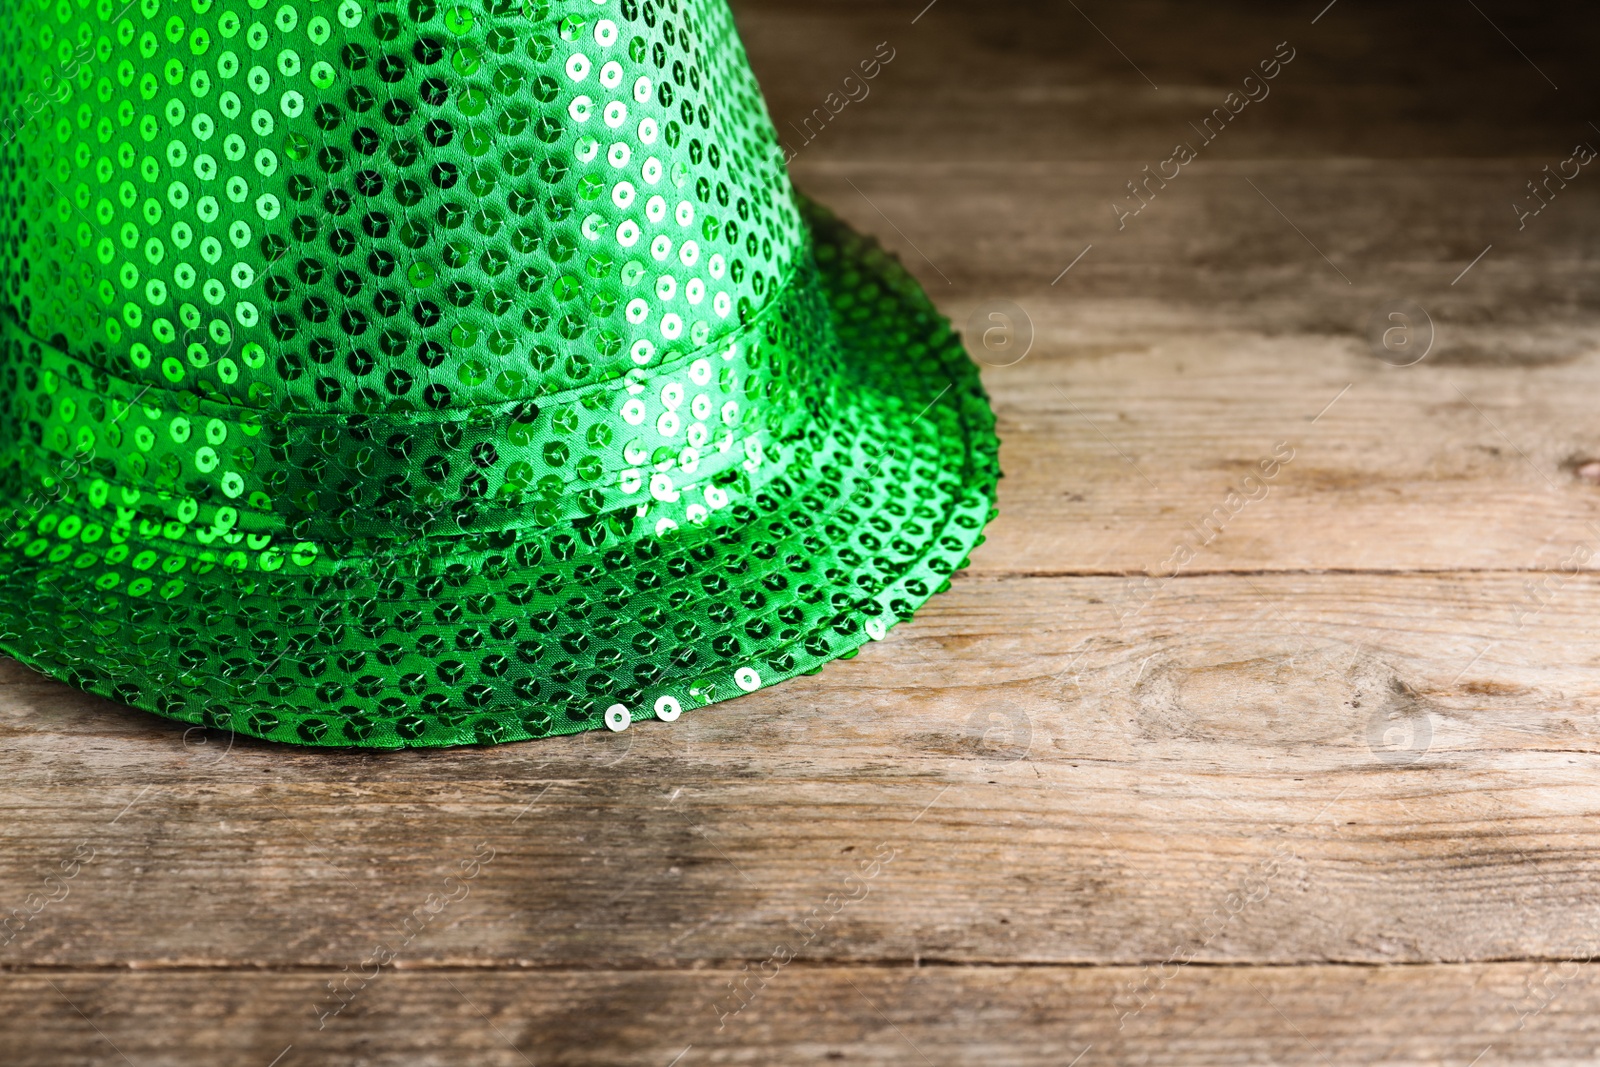 Photo of Green leprechaun hat on wooden table, space for text. St. Patrick's Day celebration